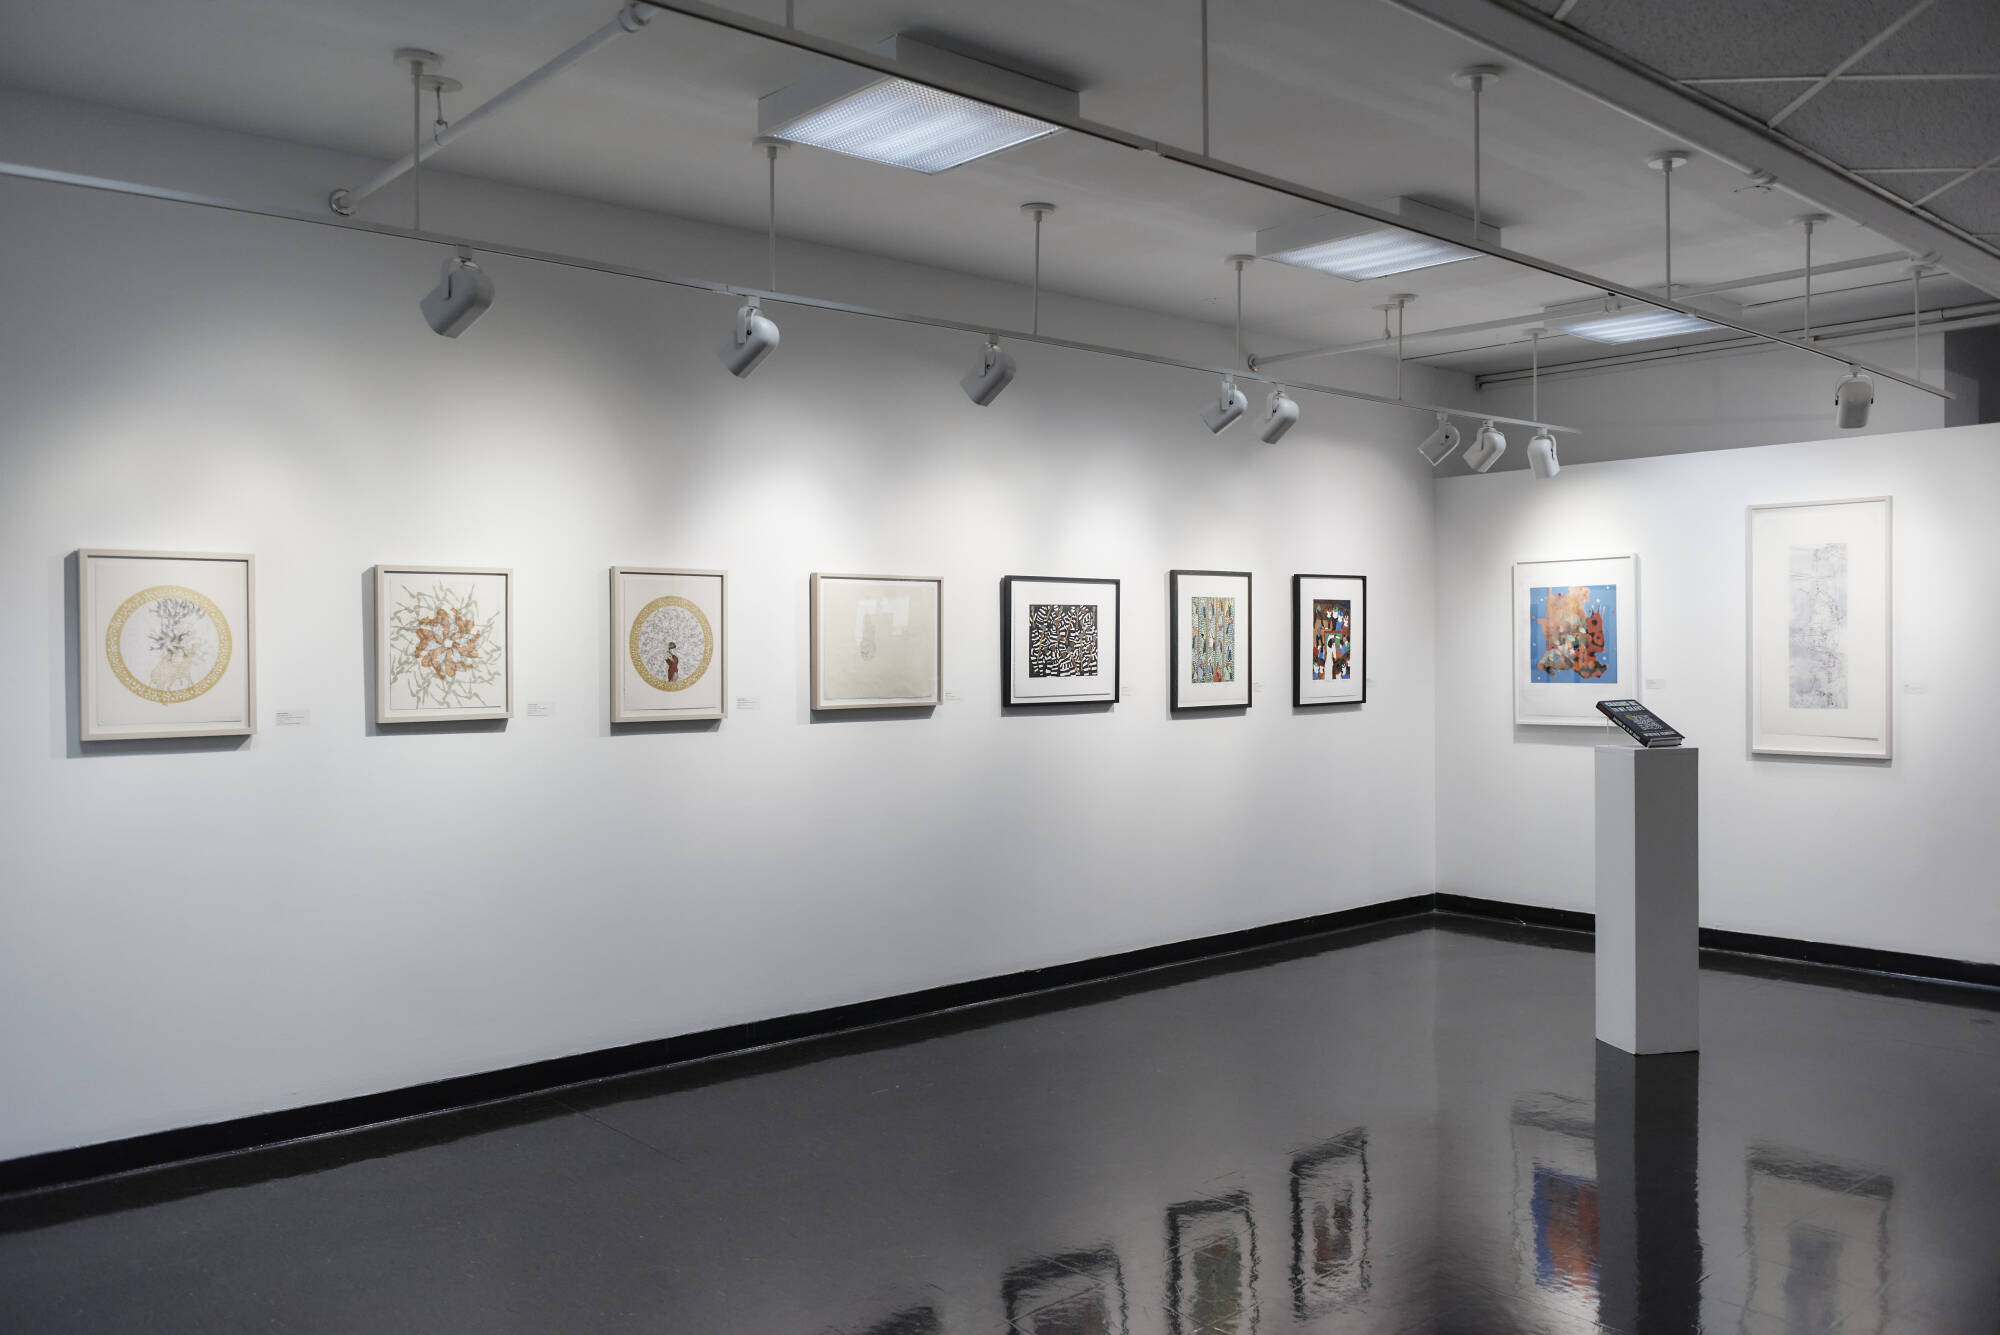 Framed artwork all lined up in a row on a white wall in the Frances Euphemia Thompson Gallery at MassArt.